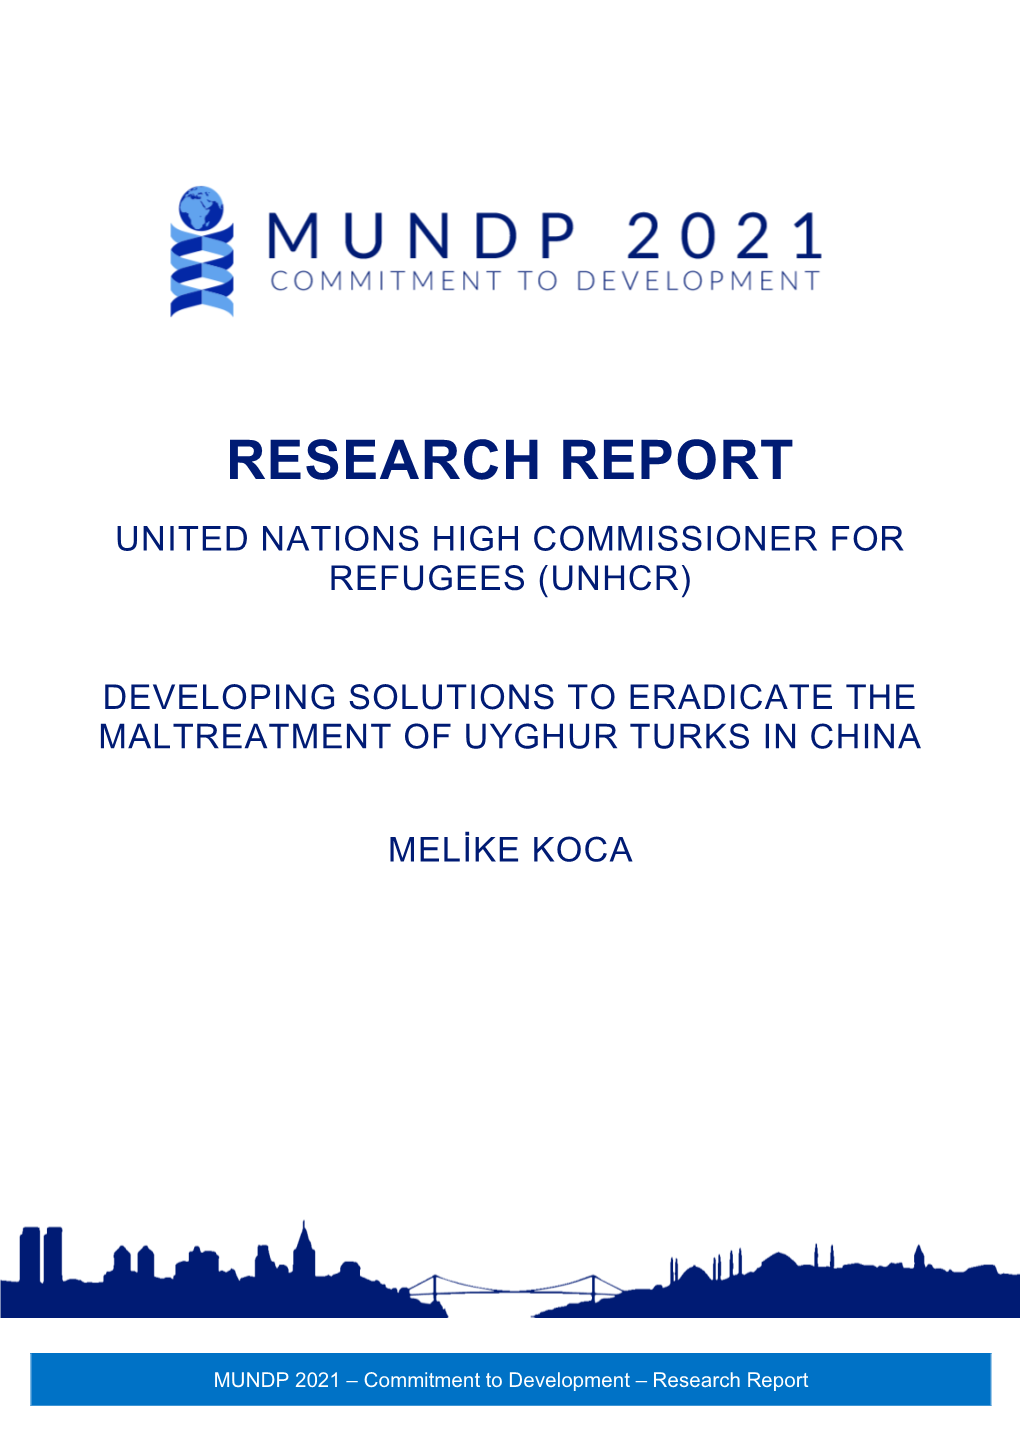 Research Report United Nations High Commissioner for Refugees (Unhcr)